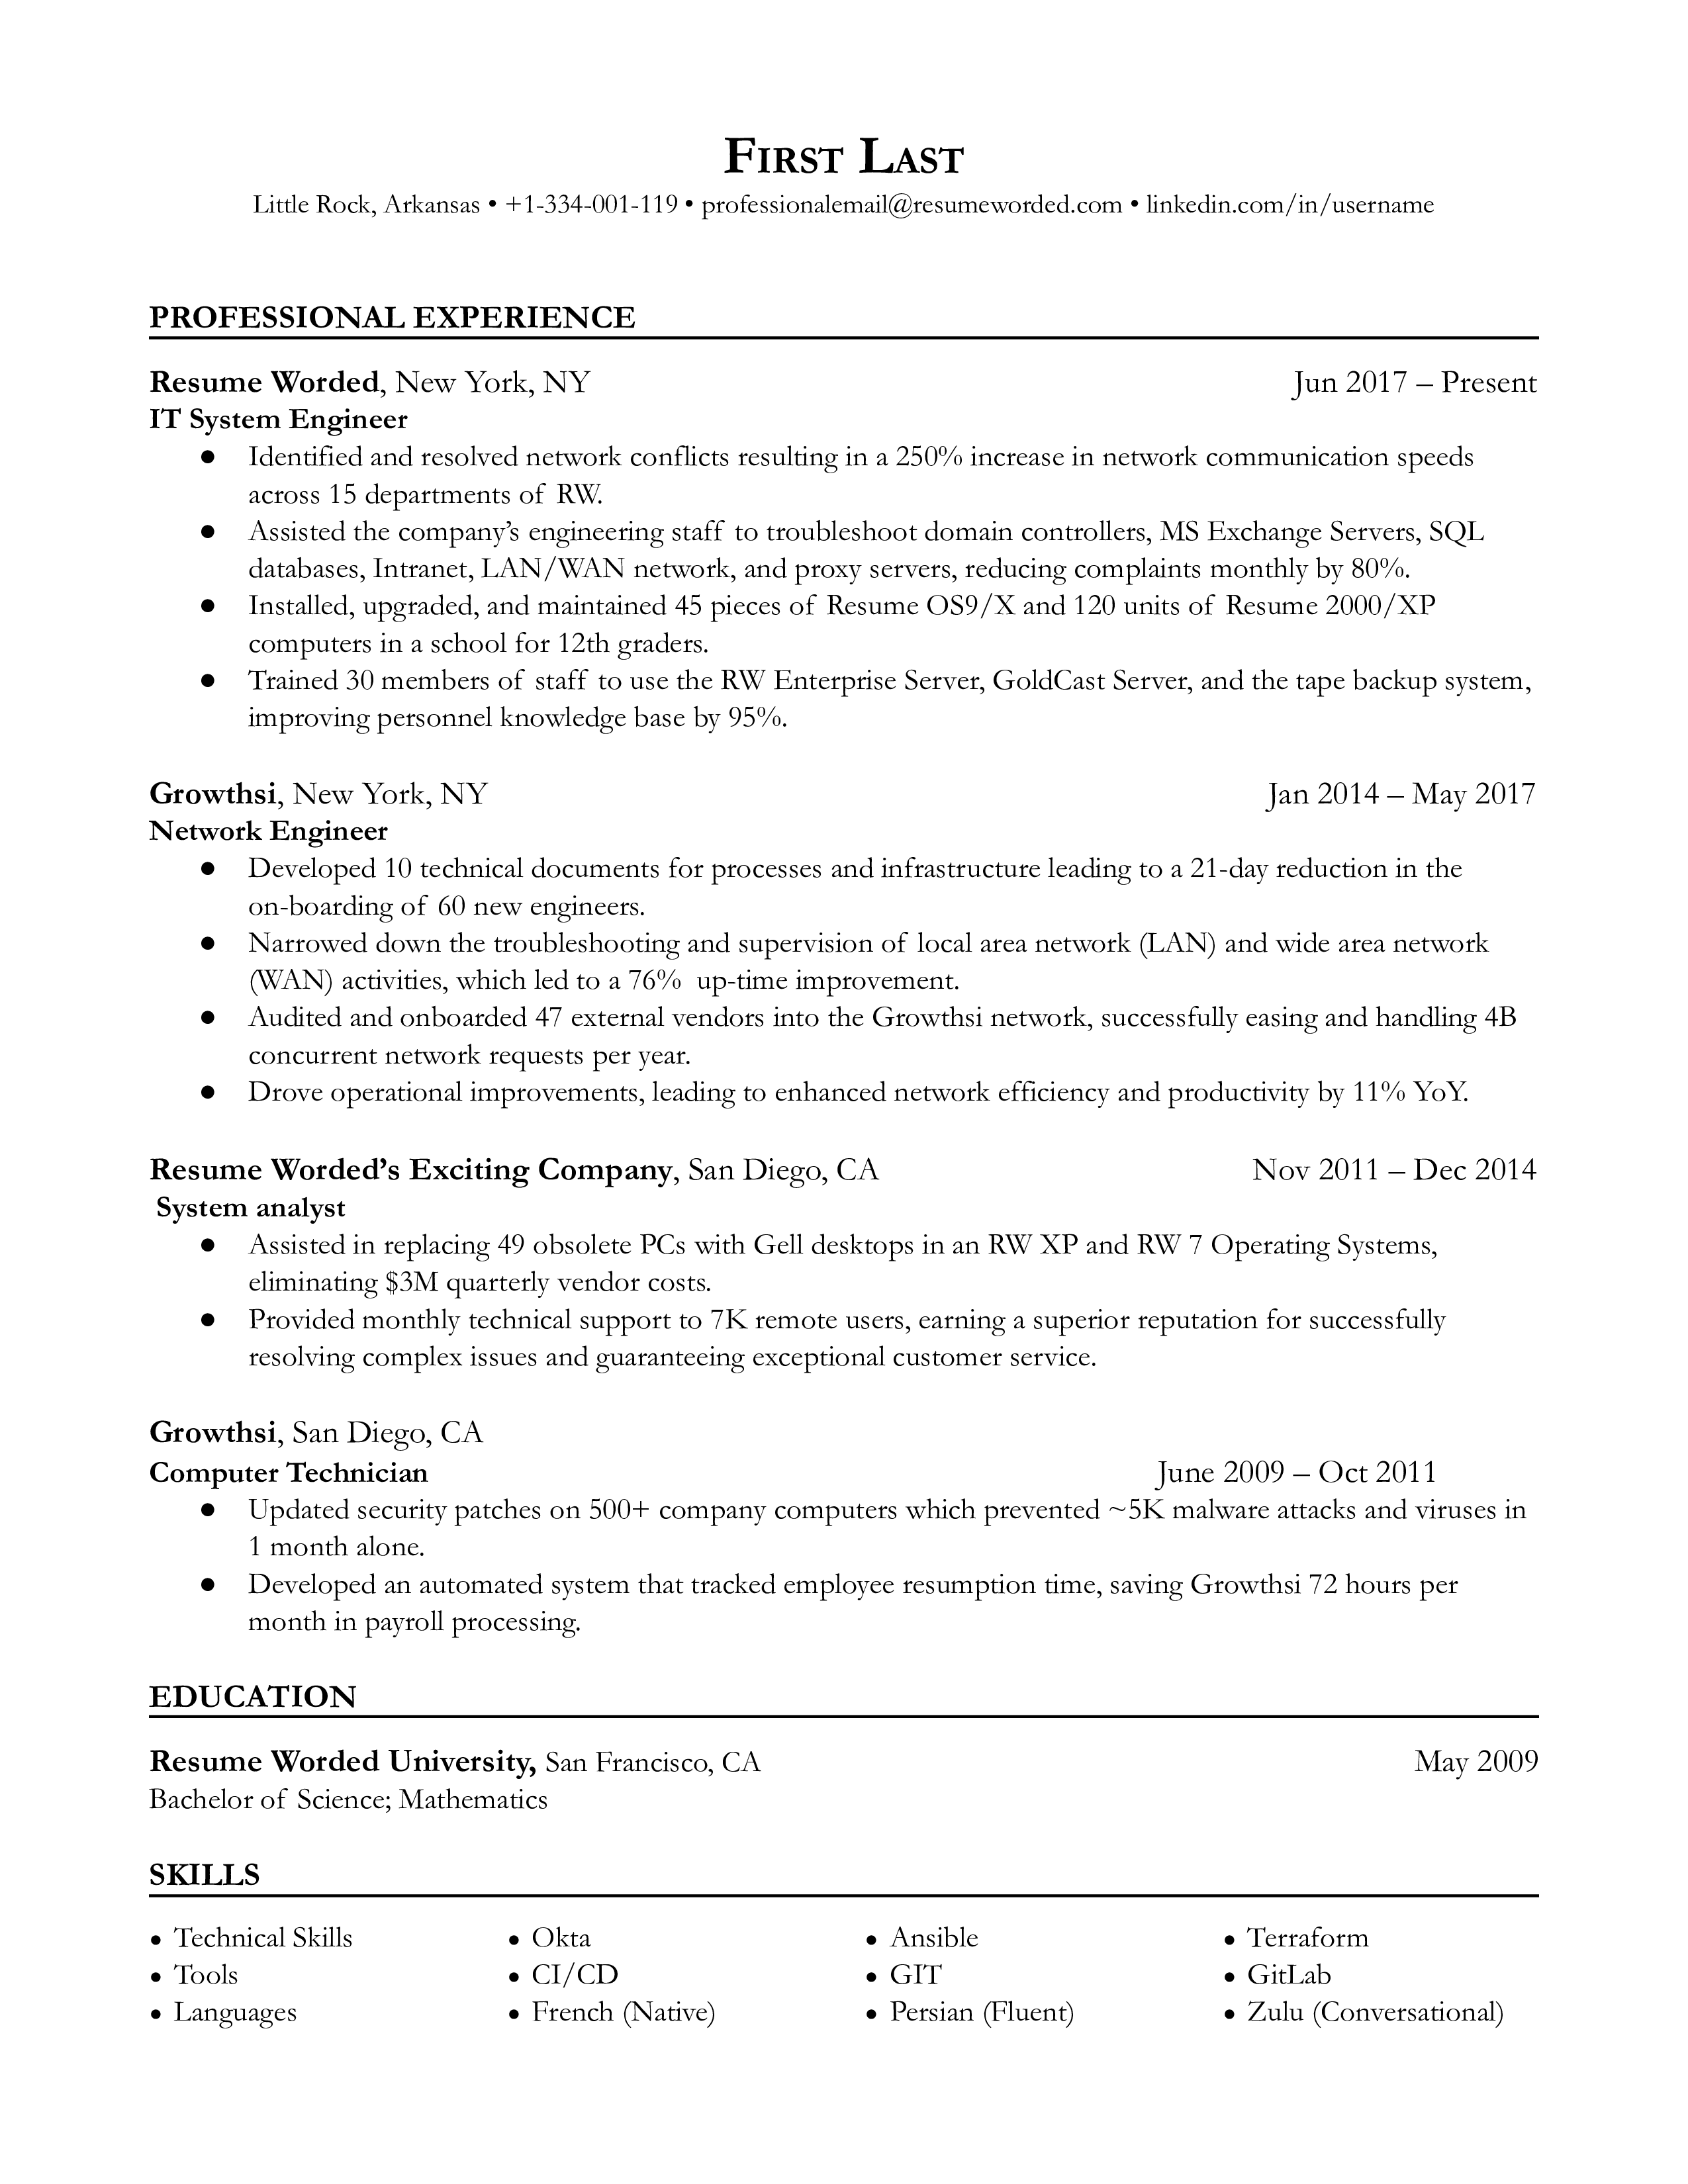 A well-structured resume for an IT System Engineer position.